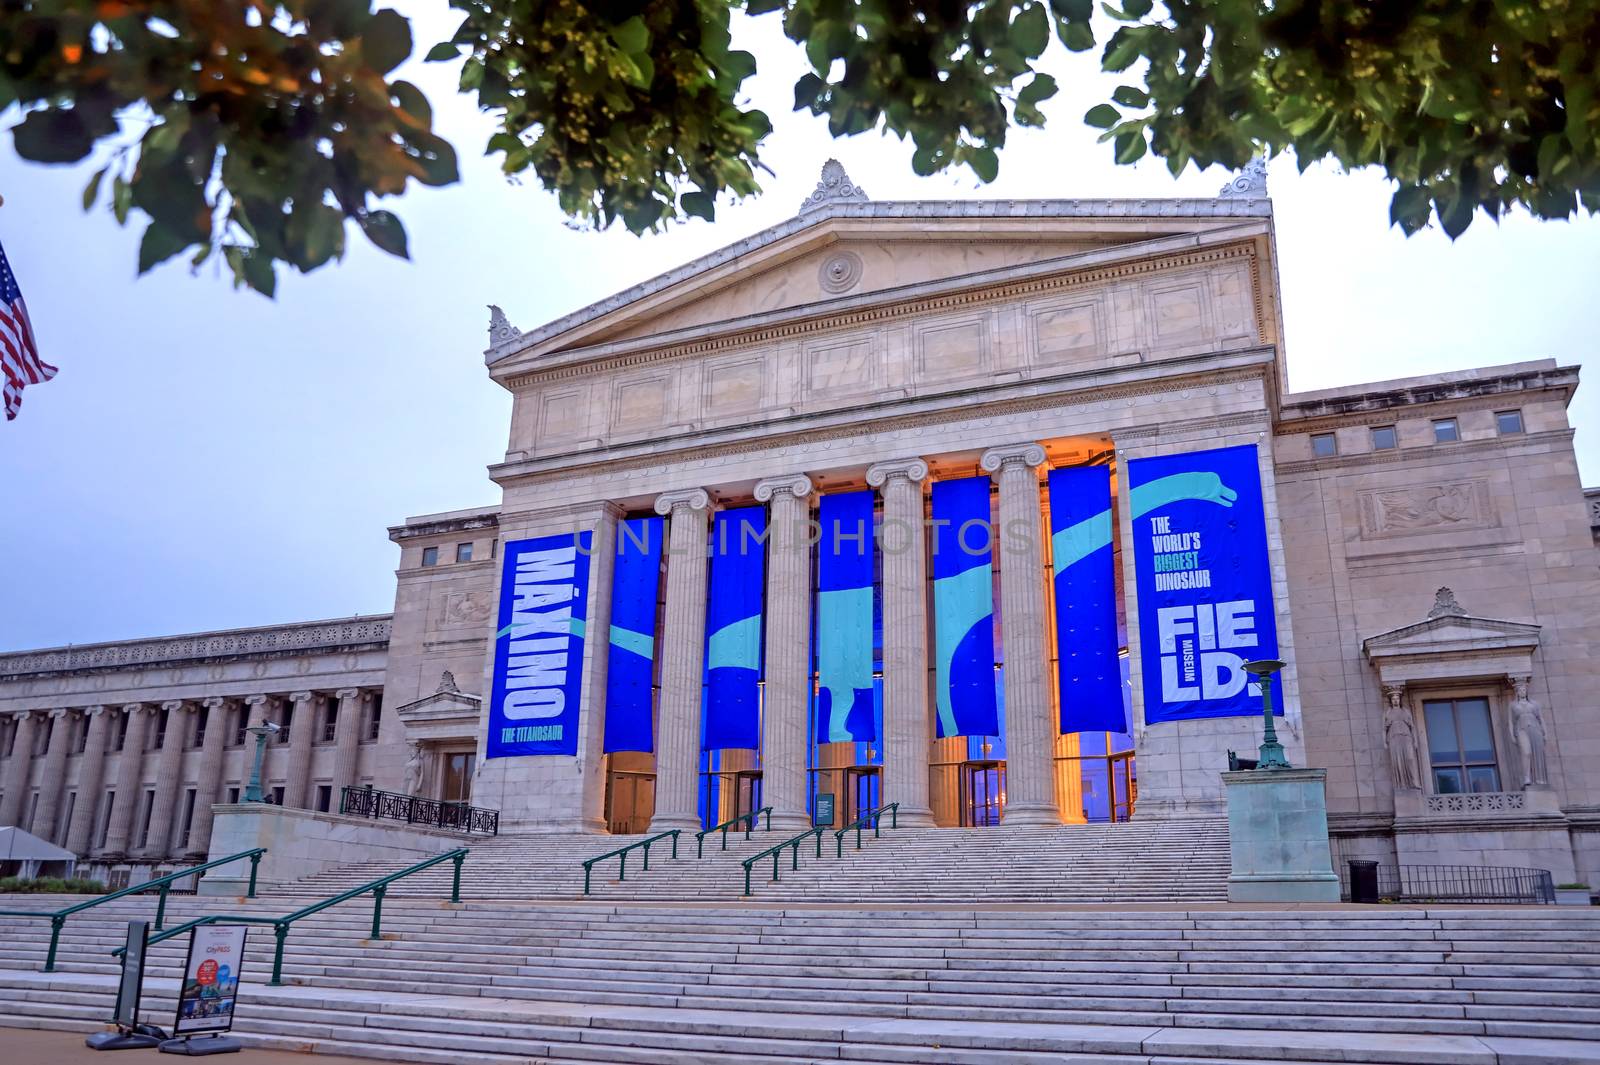 Chicago, Illinois, USA - June 22, 2018: The Field Museum. The natural history museum in Chicago, is one of the largest such museums in the world.